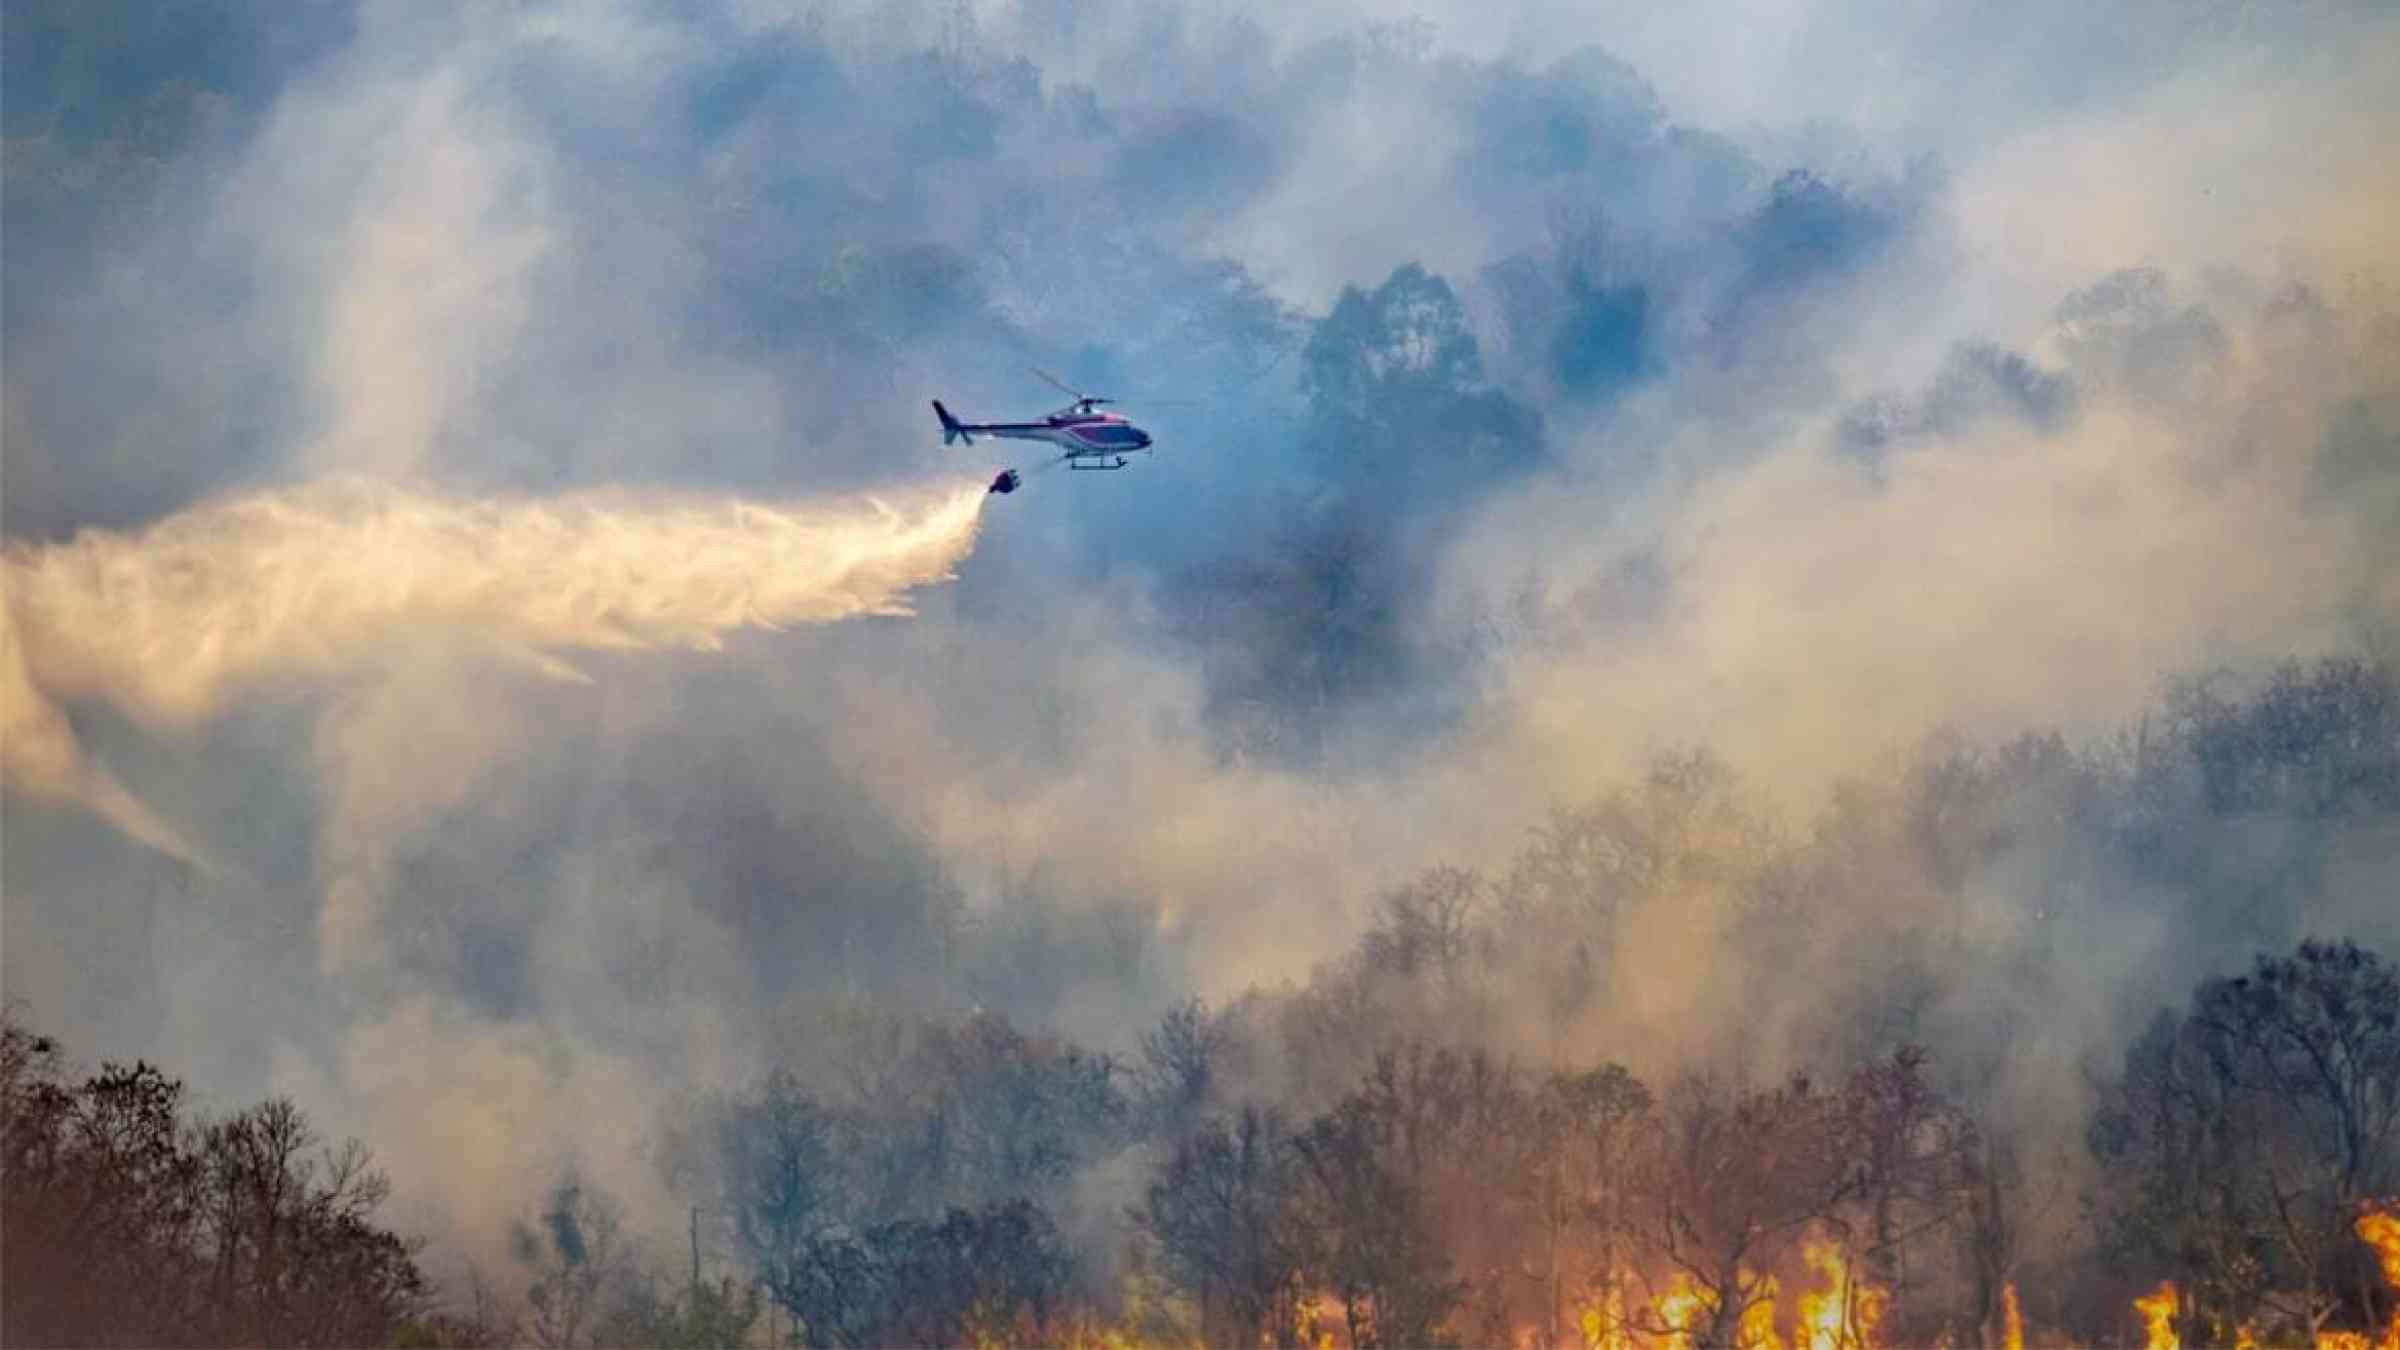 A helicopter drops water on a raging bushfire